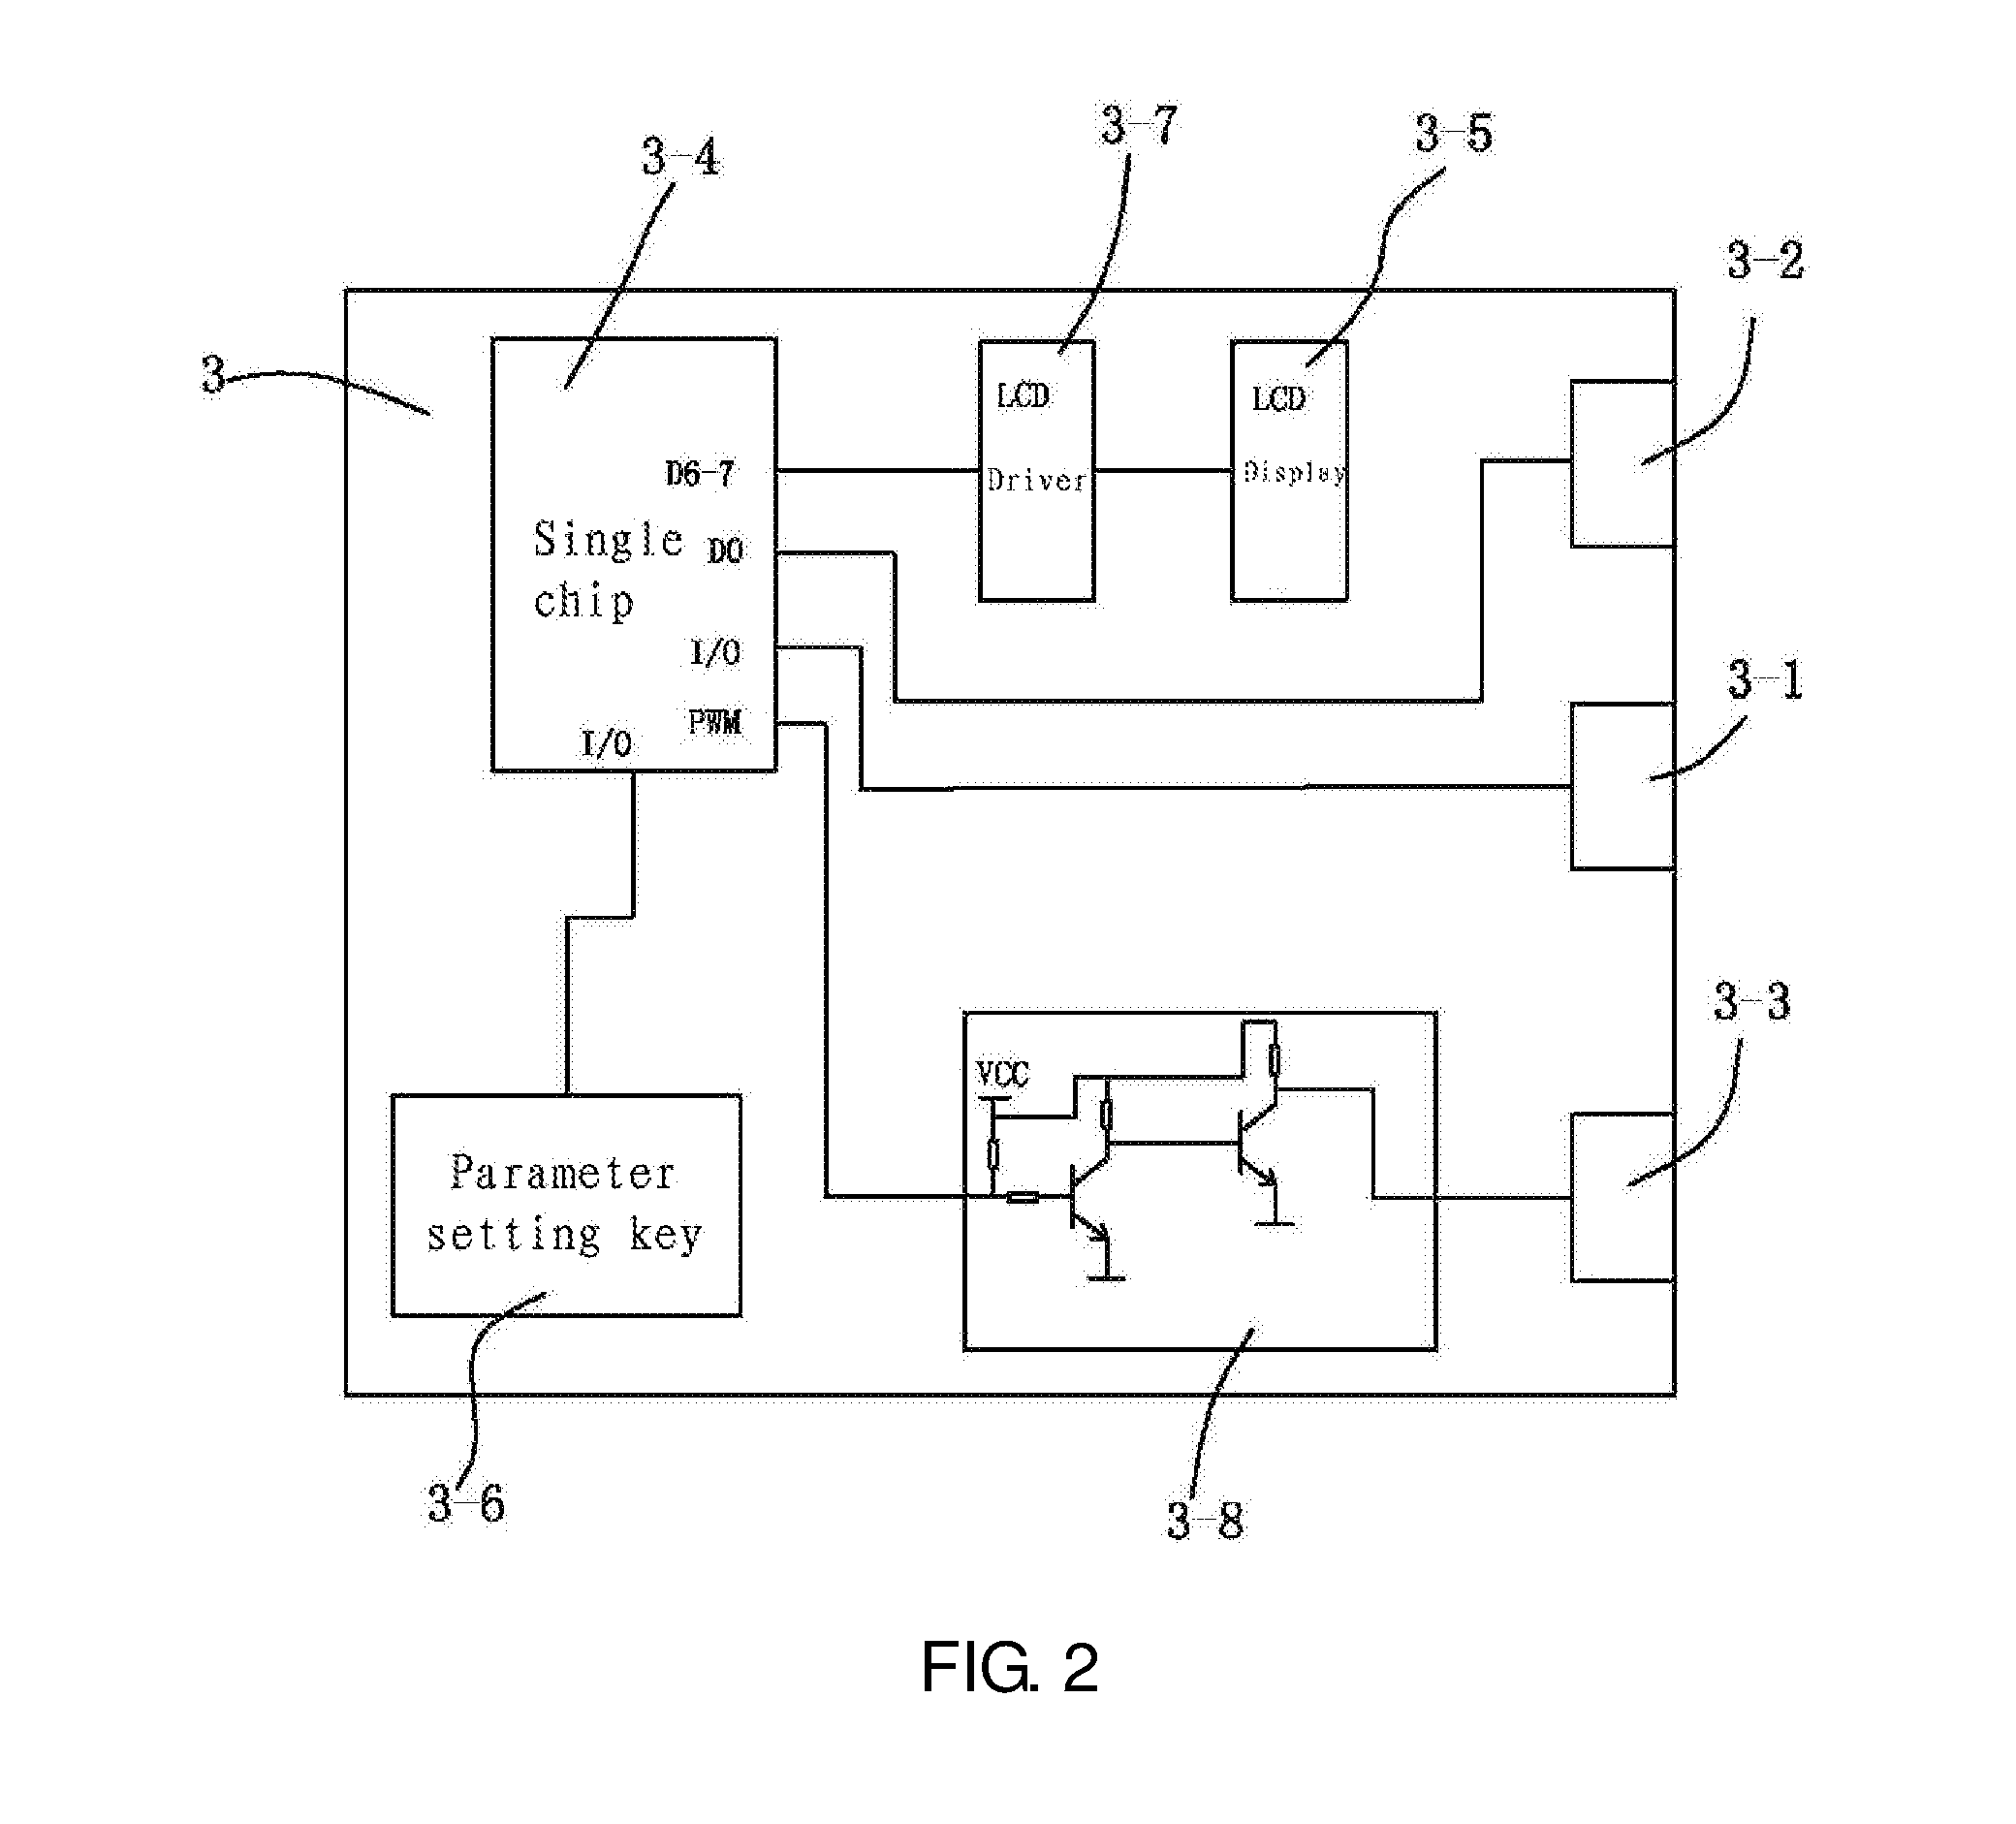 On-line cleaning system and control method for carbon deposit in engine intake valve and combustion chamber